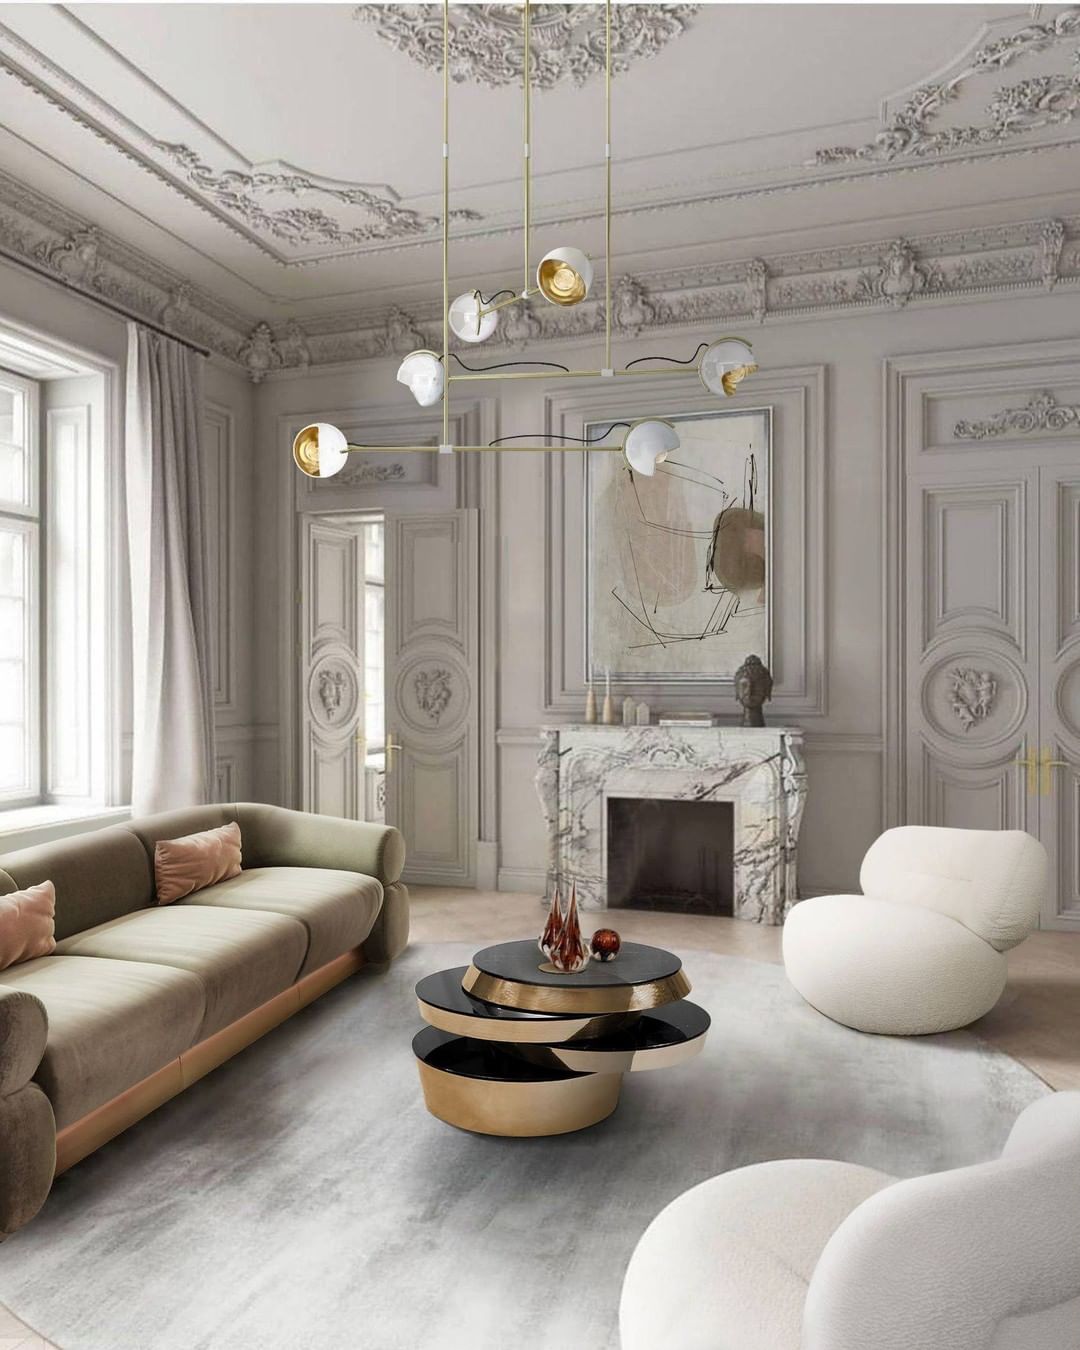 GET INSPIRE BY THIS LUXURIOUS LIVING ROOM